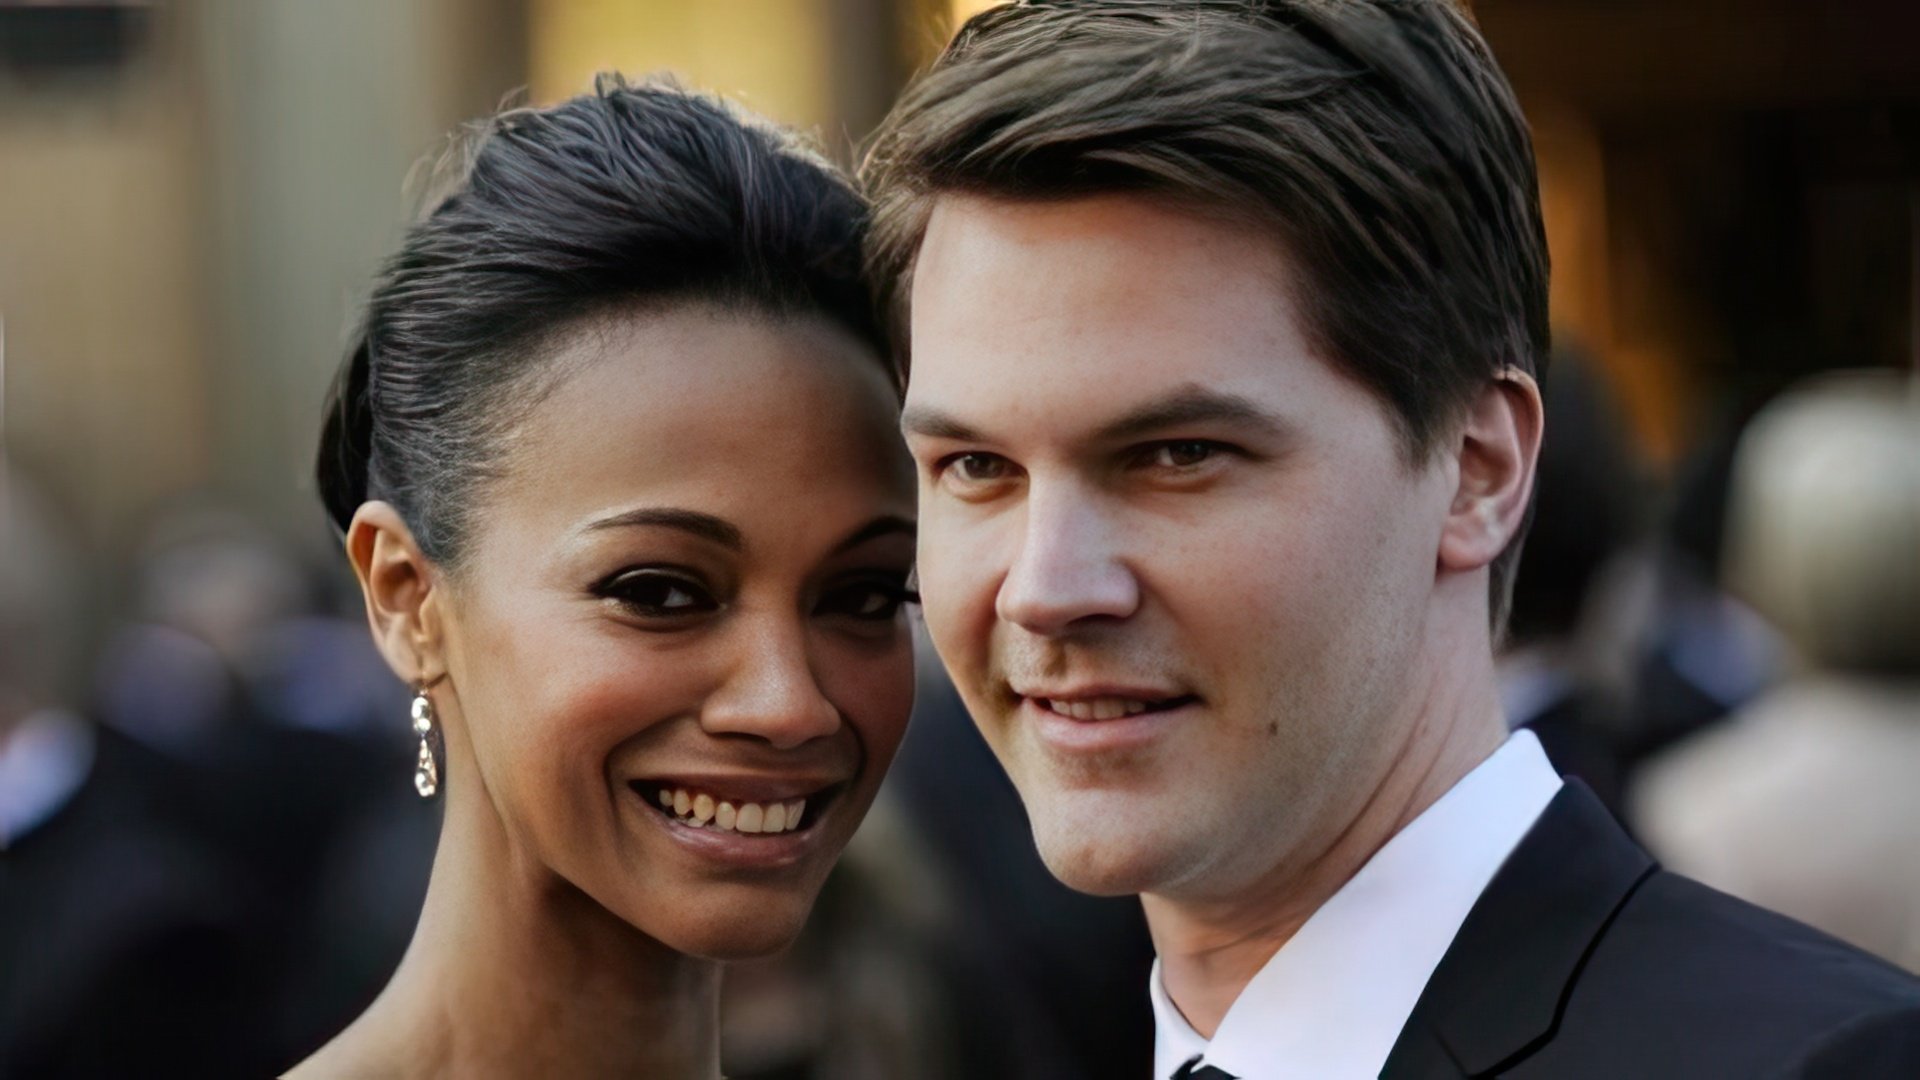 Zoe Saldana and Keith Britton had been dating for 11 years